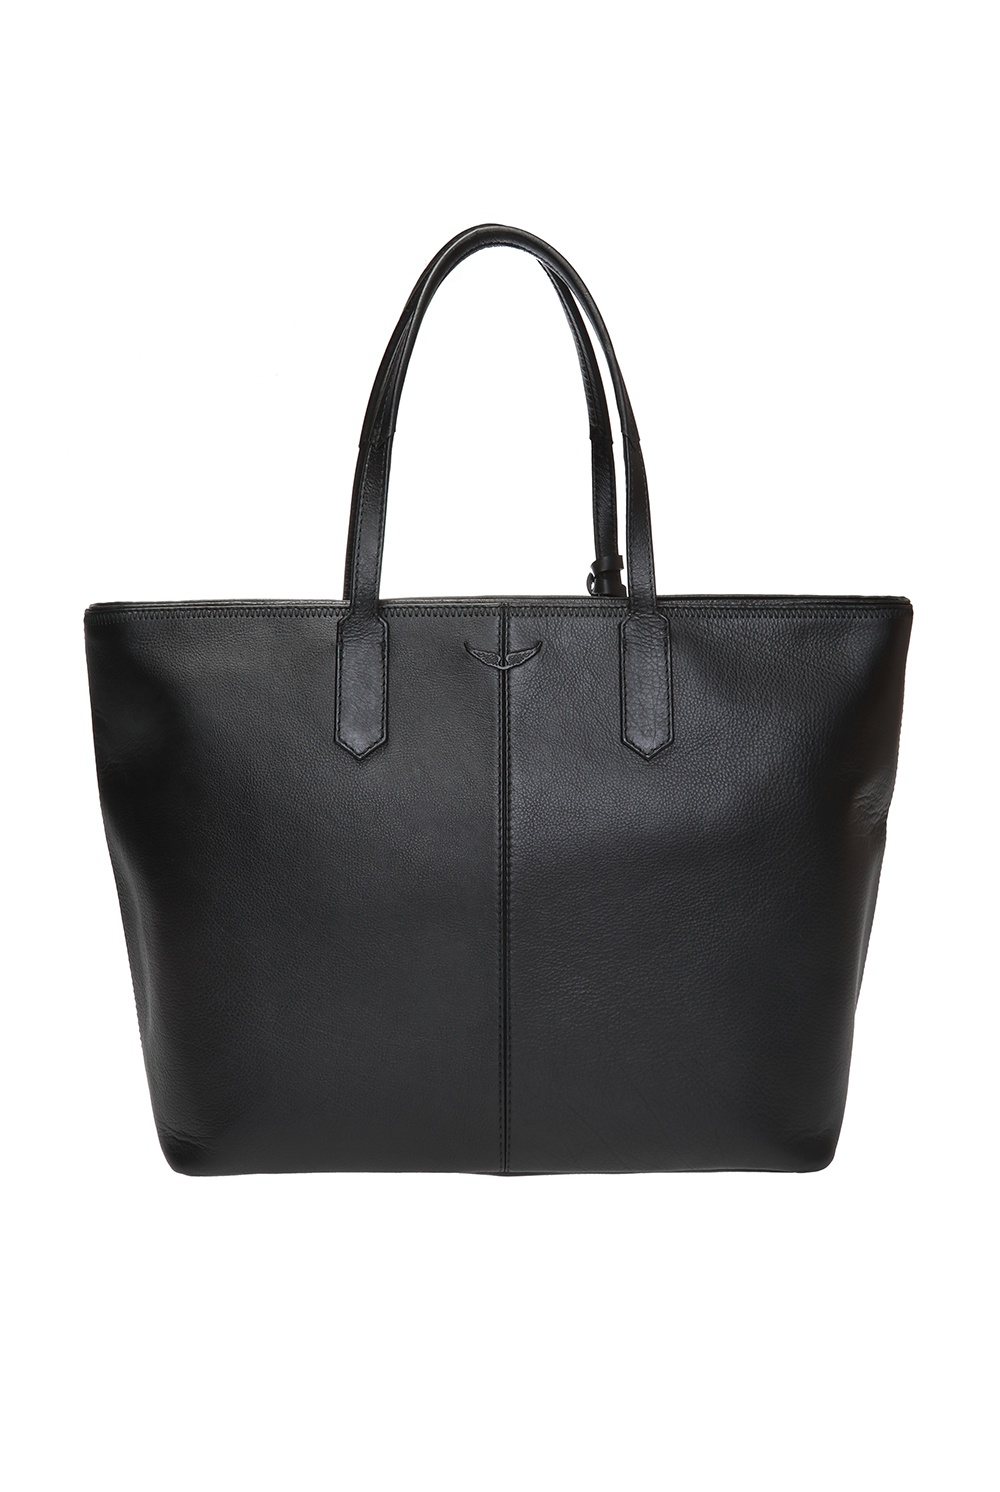 Zadig and Voltaire Black Leather Mick Tote Zadig and Voltaire